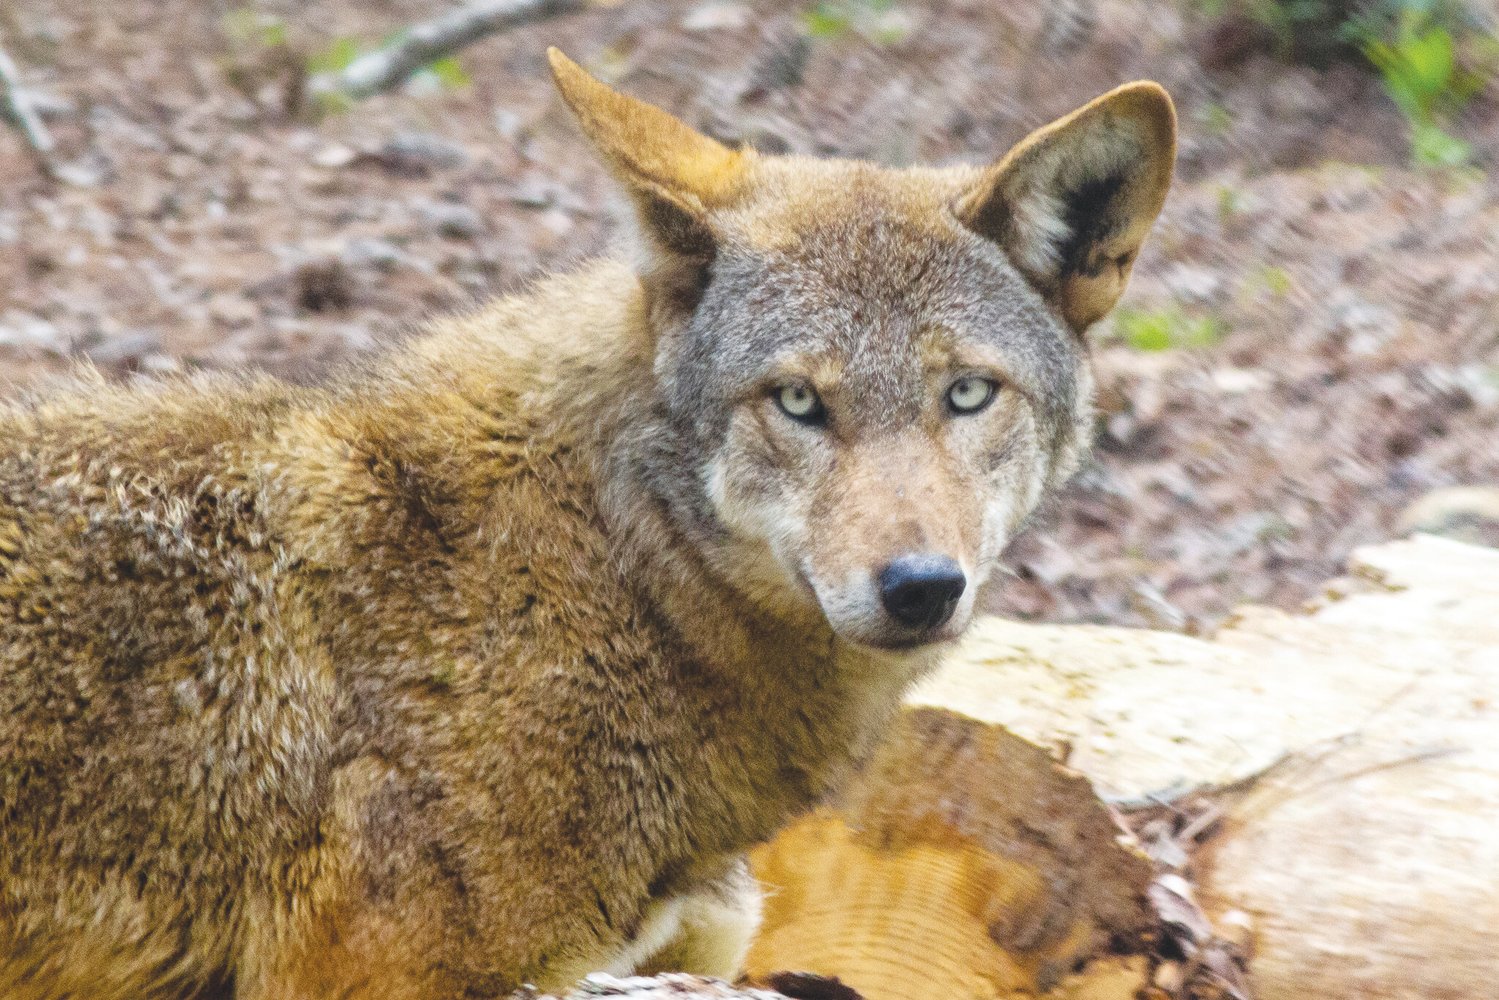 The red wolf Caroline, who's 3 years old.